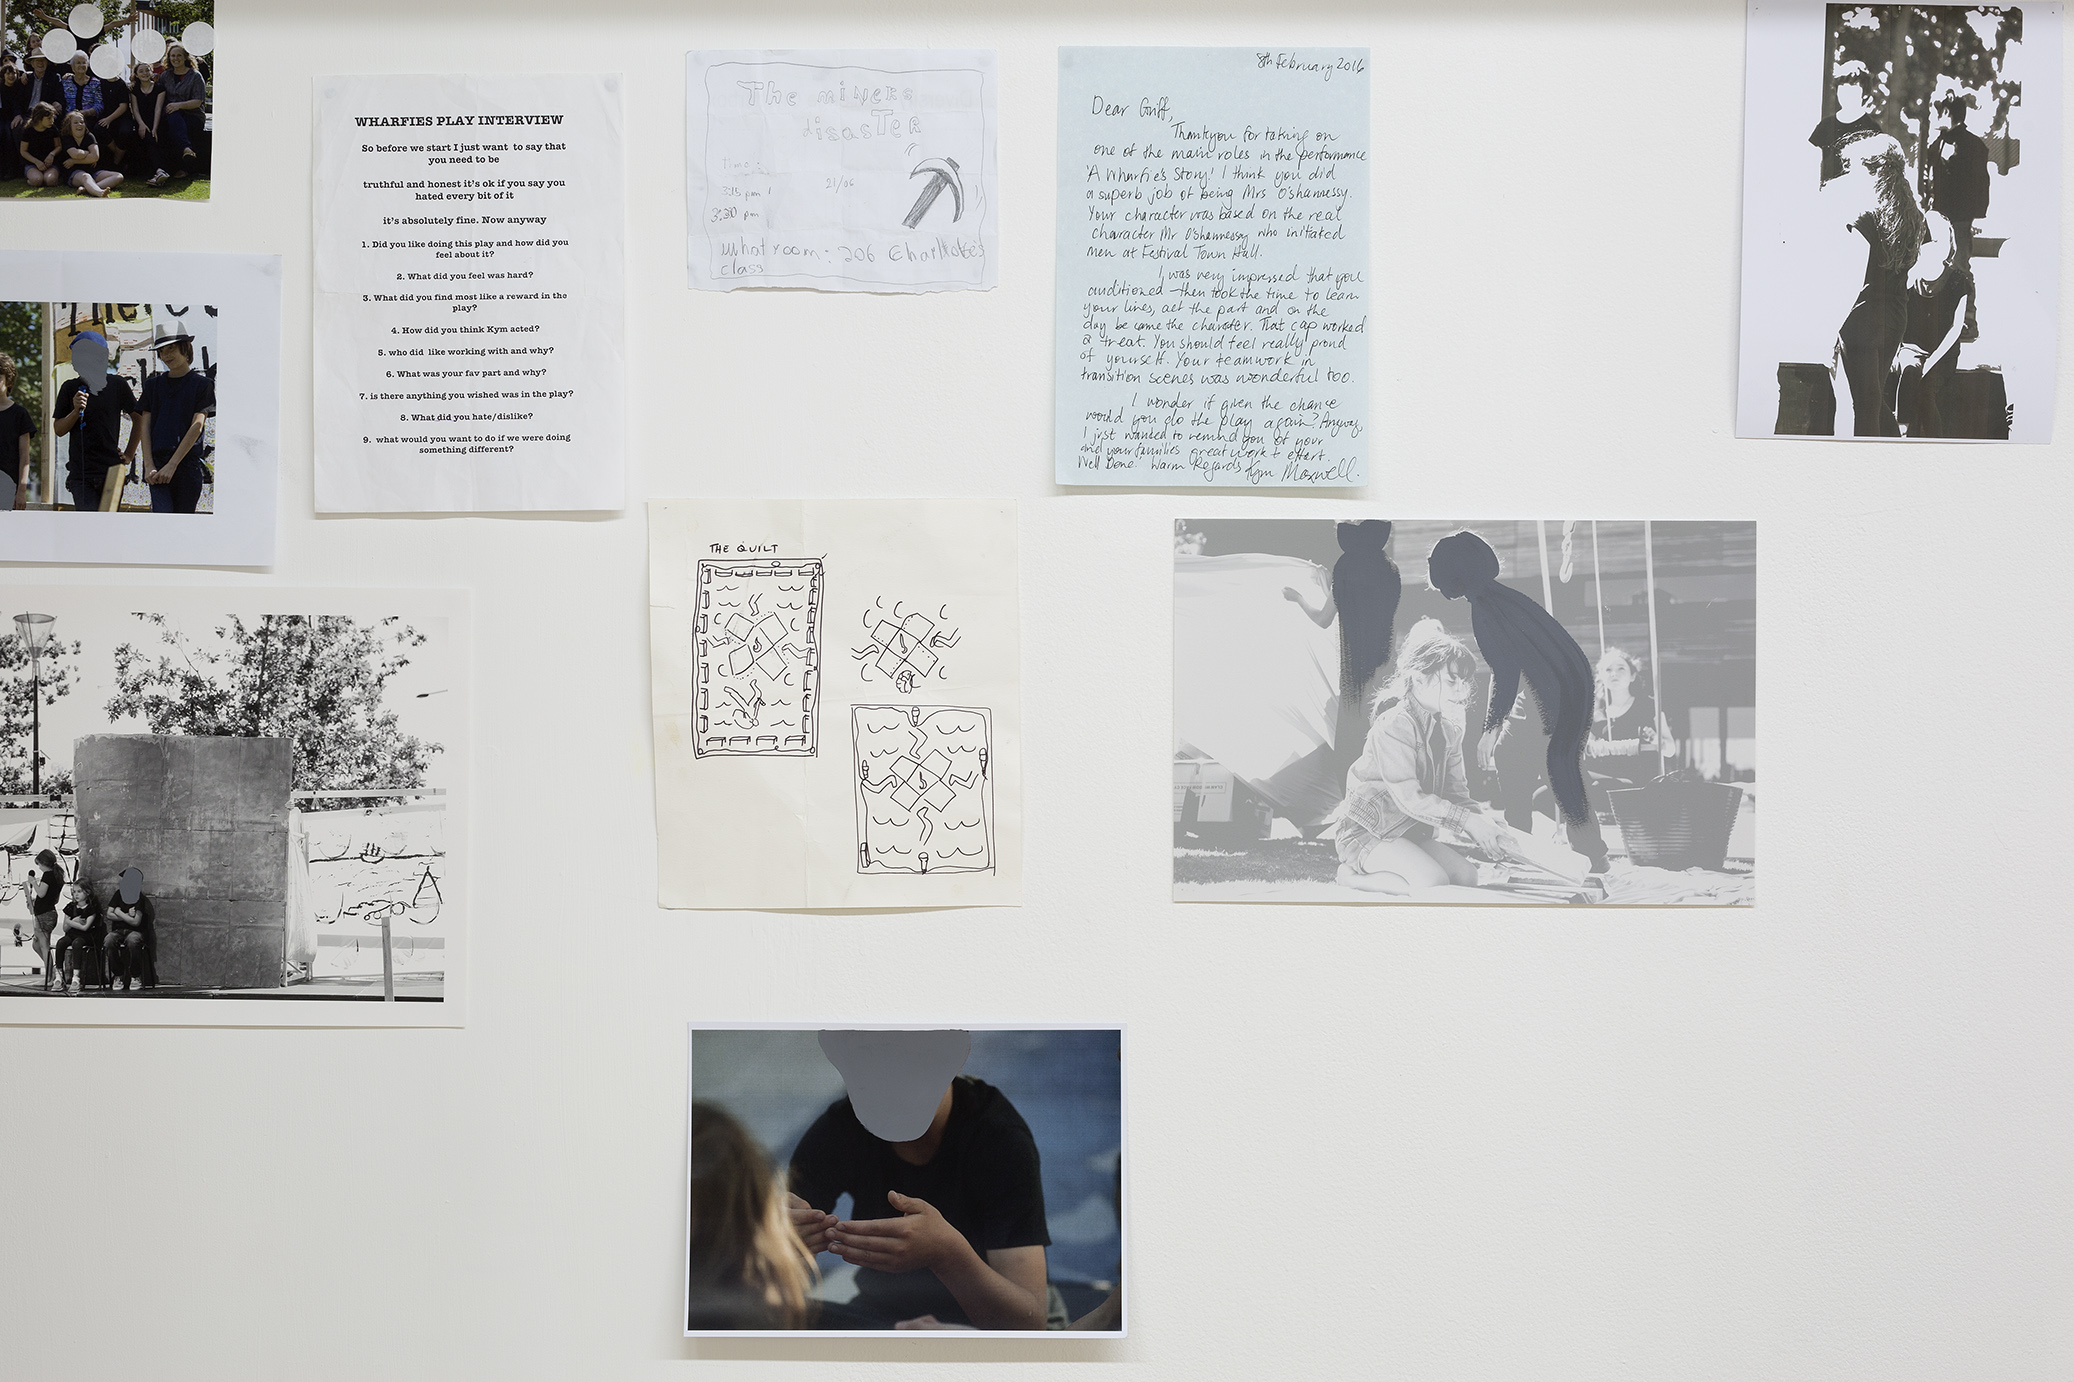   storyboard iteration 2017 , teaching and leaning ephemera from a 2015 performance arts curriculum, seven pine stud arches and frames, white corduroy, nails, screws, two wooden stools, archival images gifted from Jim and Tui Beggs, multiple imagery 